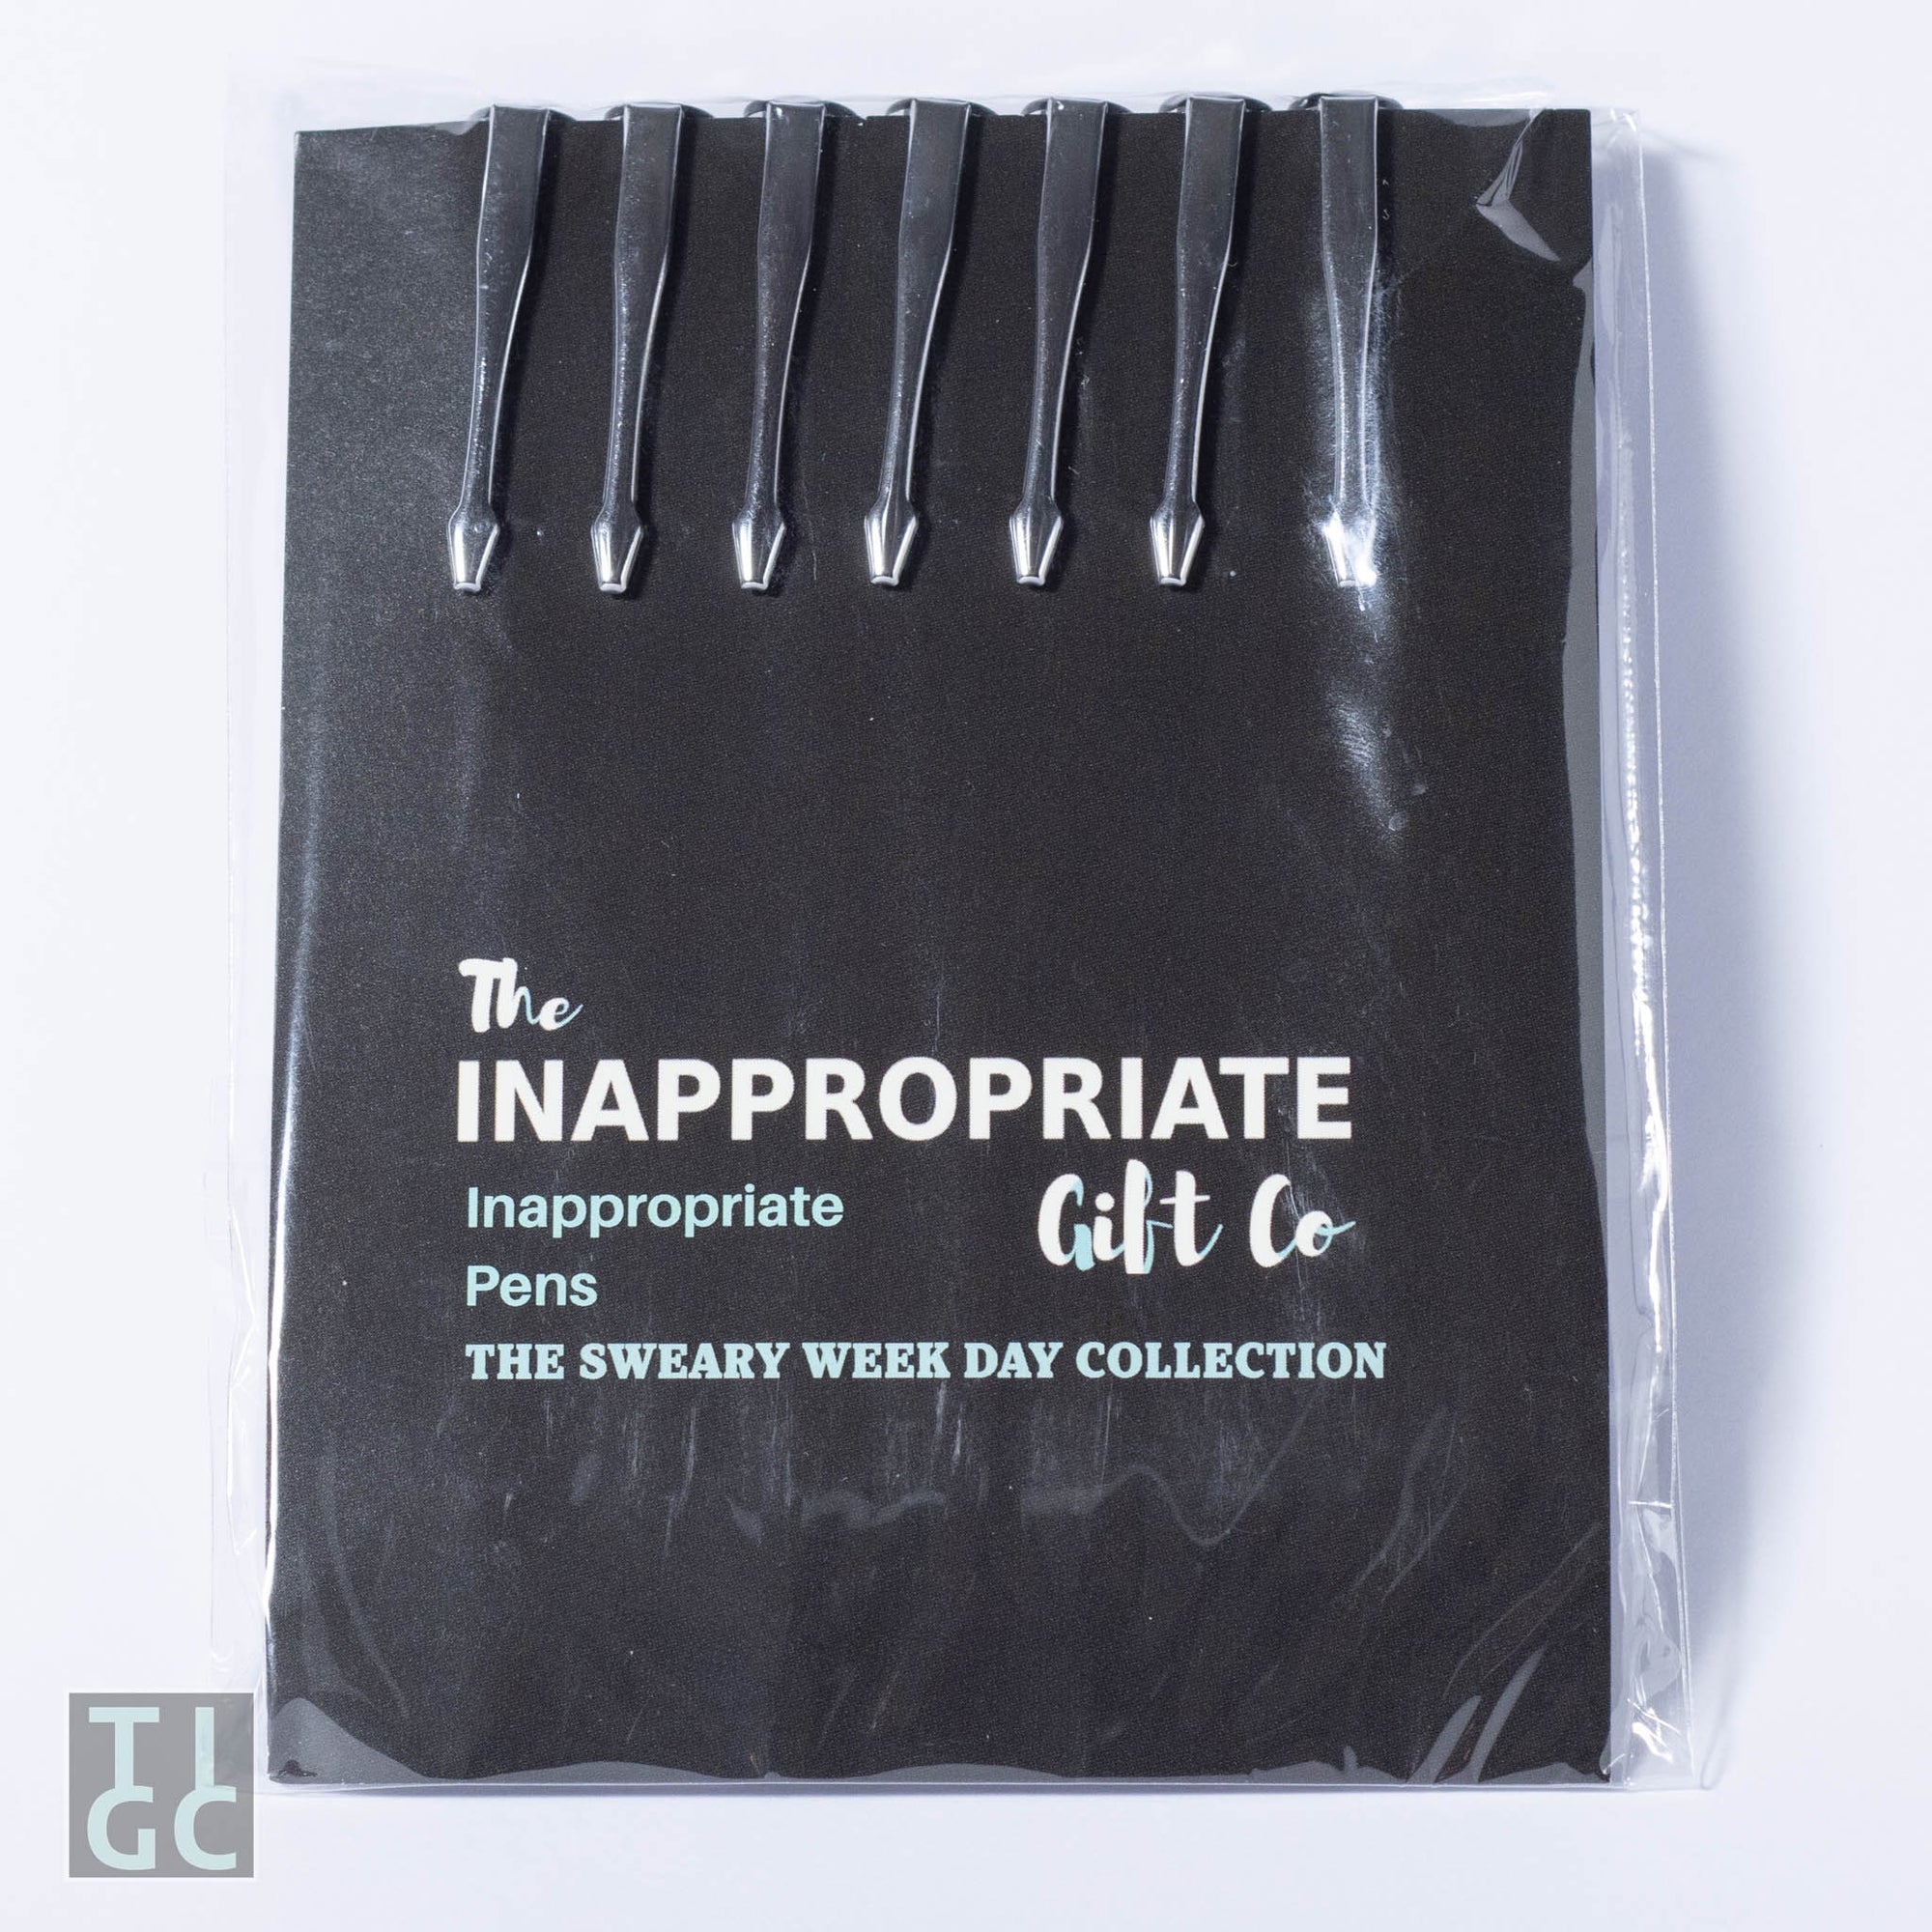 TIGC The Inappropriate Gift Co Inappropriate Pens - The Sweary Week Collection